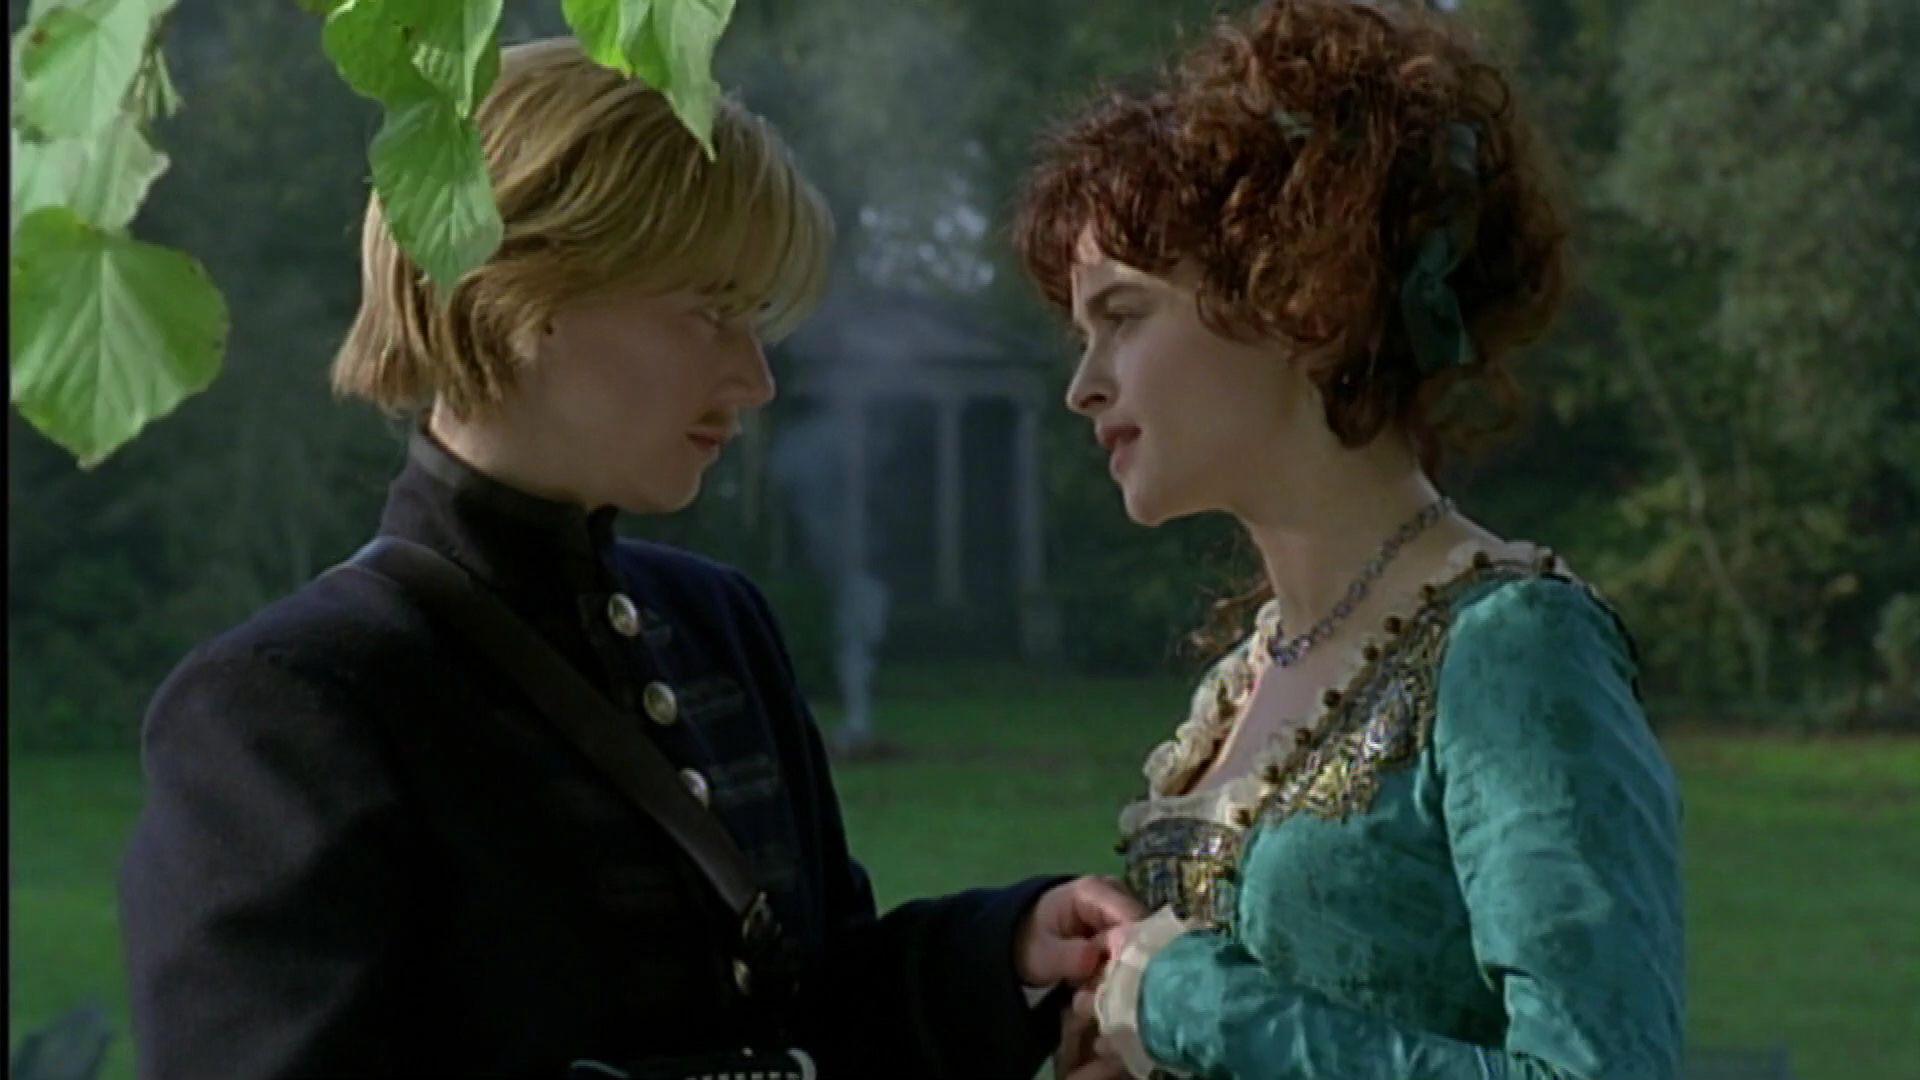 Helena Bonham Carter in Twelfth Night, sharing a tender moment with Imogen Stubbs who is dressed as a man